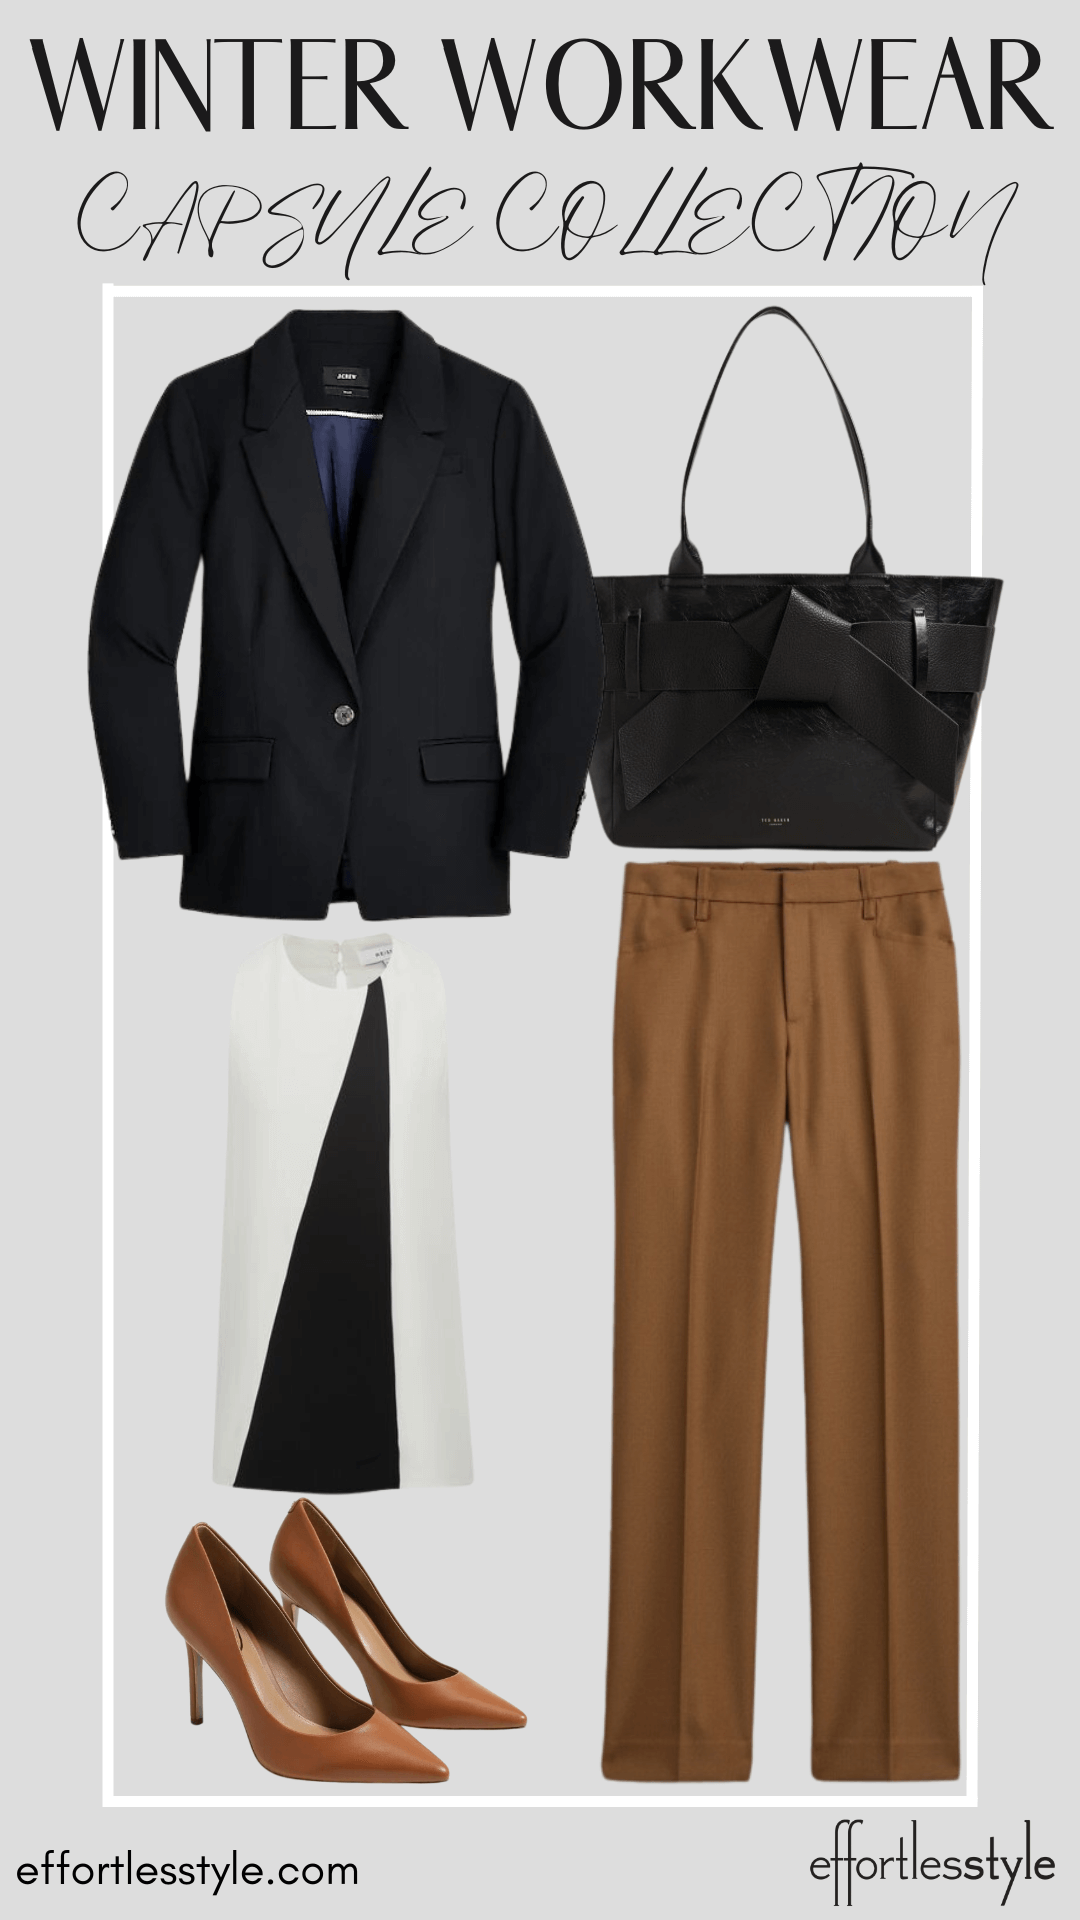 How To Wear Our Winter Workwear Capsule Wardrobe - Part 2 Sleeveless Blouse & Camel Pants & Black Blazer how to wear brown and black together how to style brown with black how to style your camel suit pants how to wear a black blazer with brown pants how to style a colorblocked tank how to wear a color blocked tank to the office